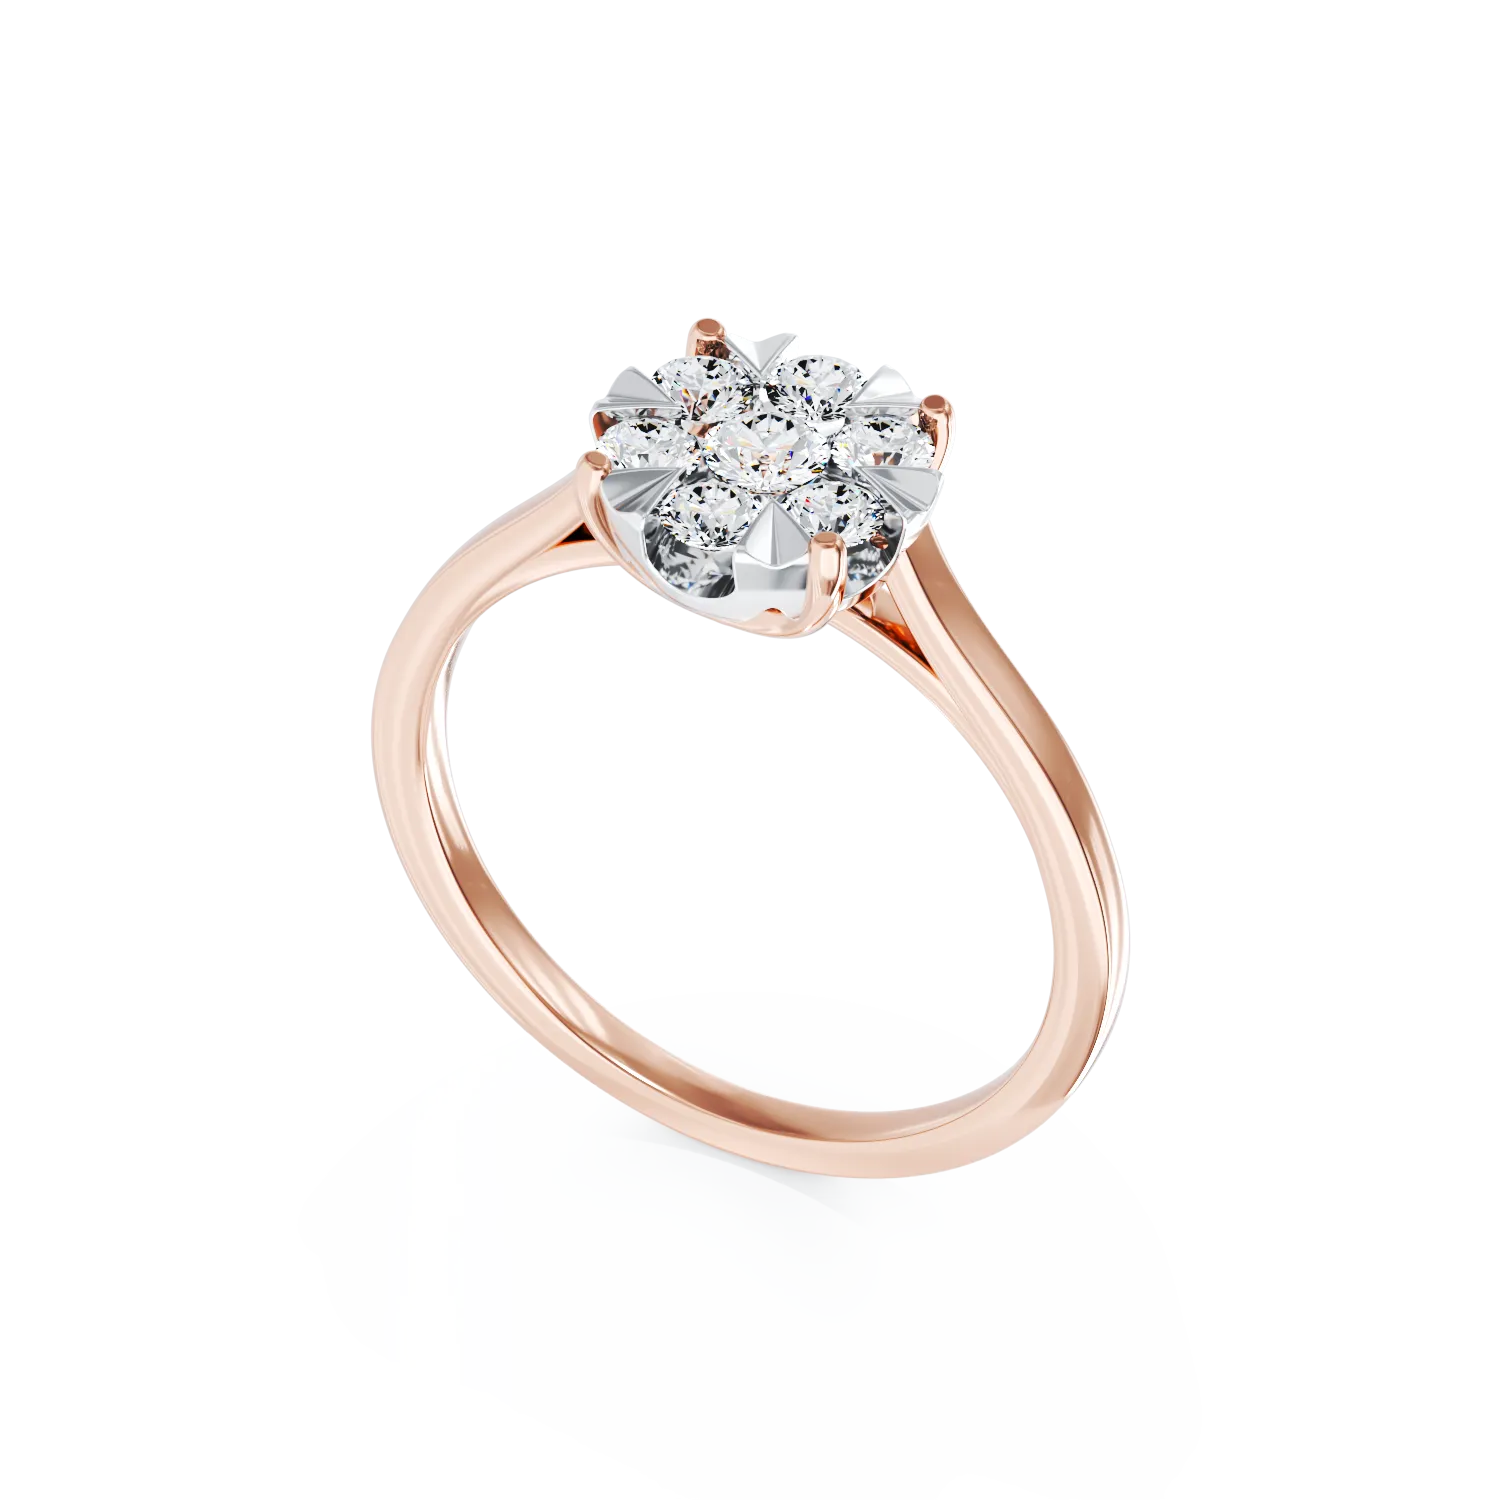 Rose gold engagement ring with 0.35ct diamonds